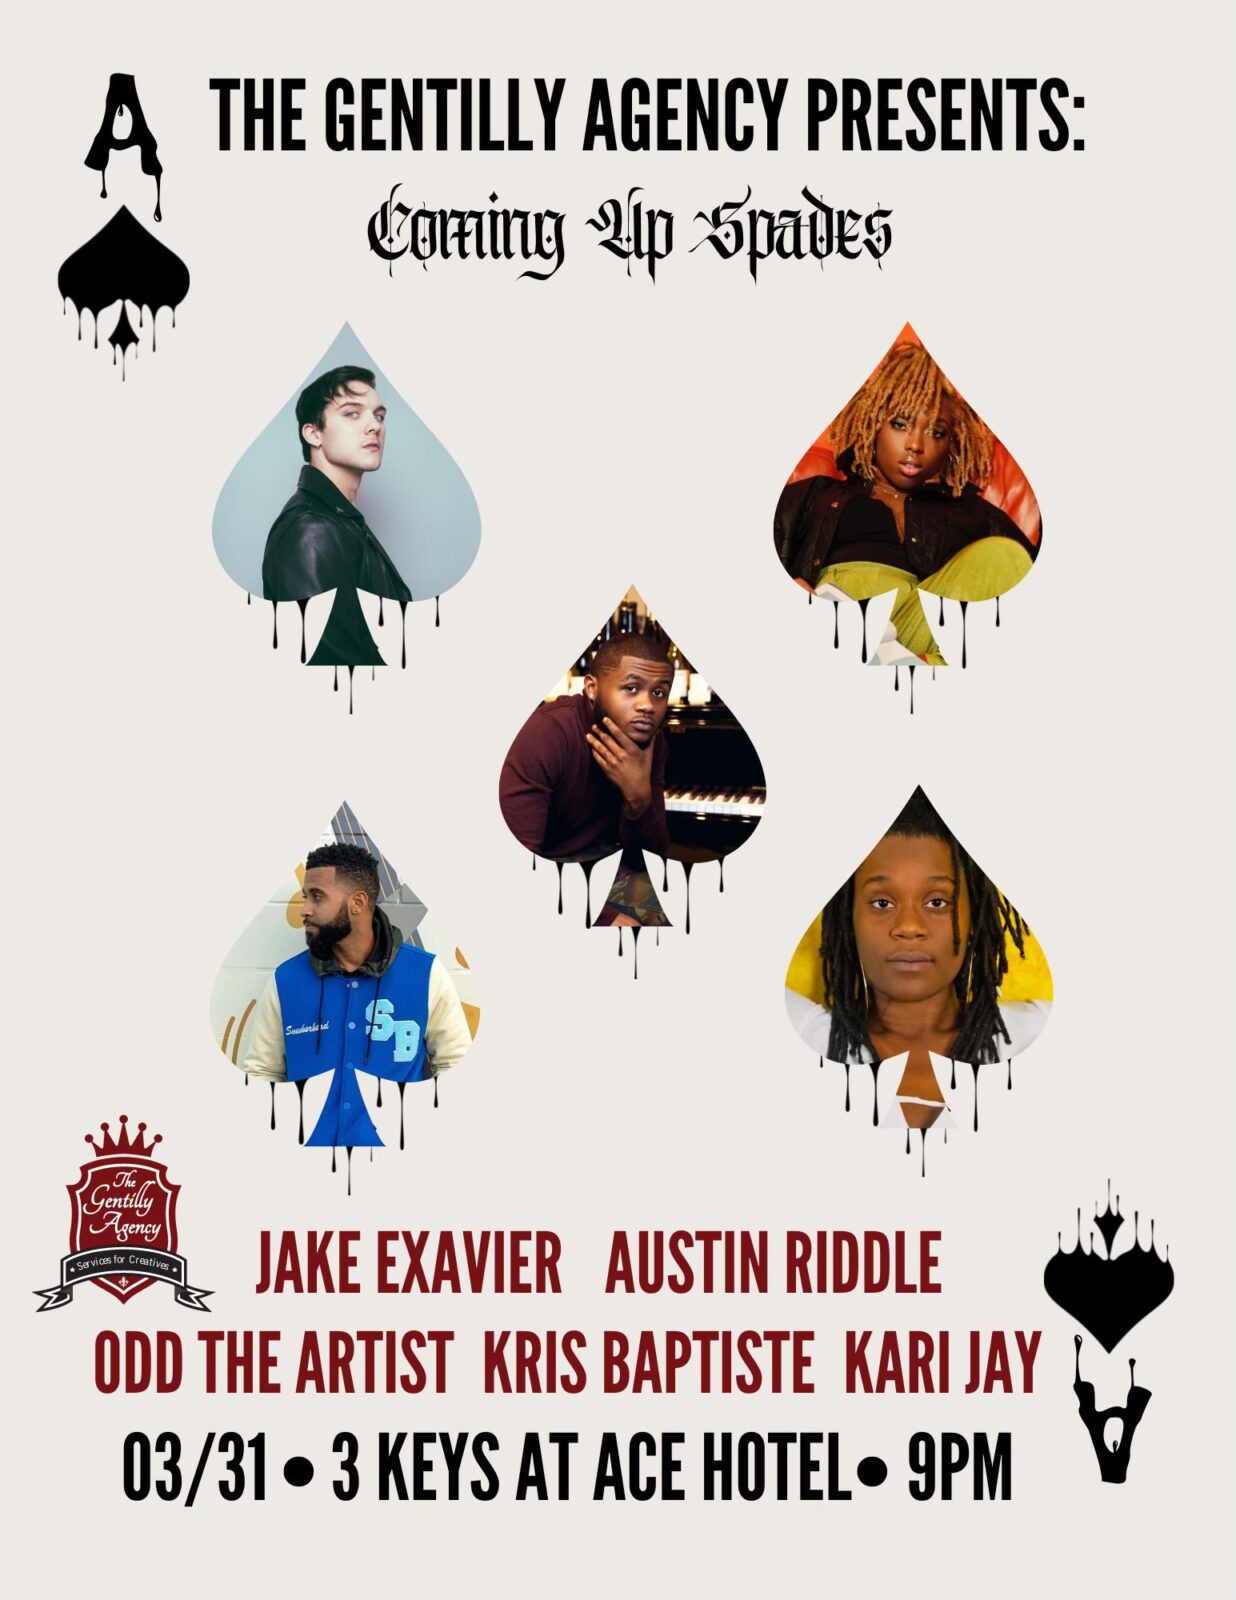 Gentilly Agency Presents - Coming Up Spades - 03/31